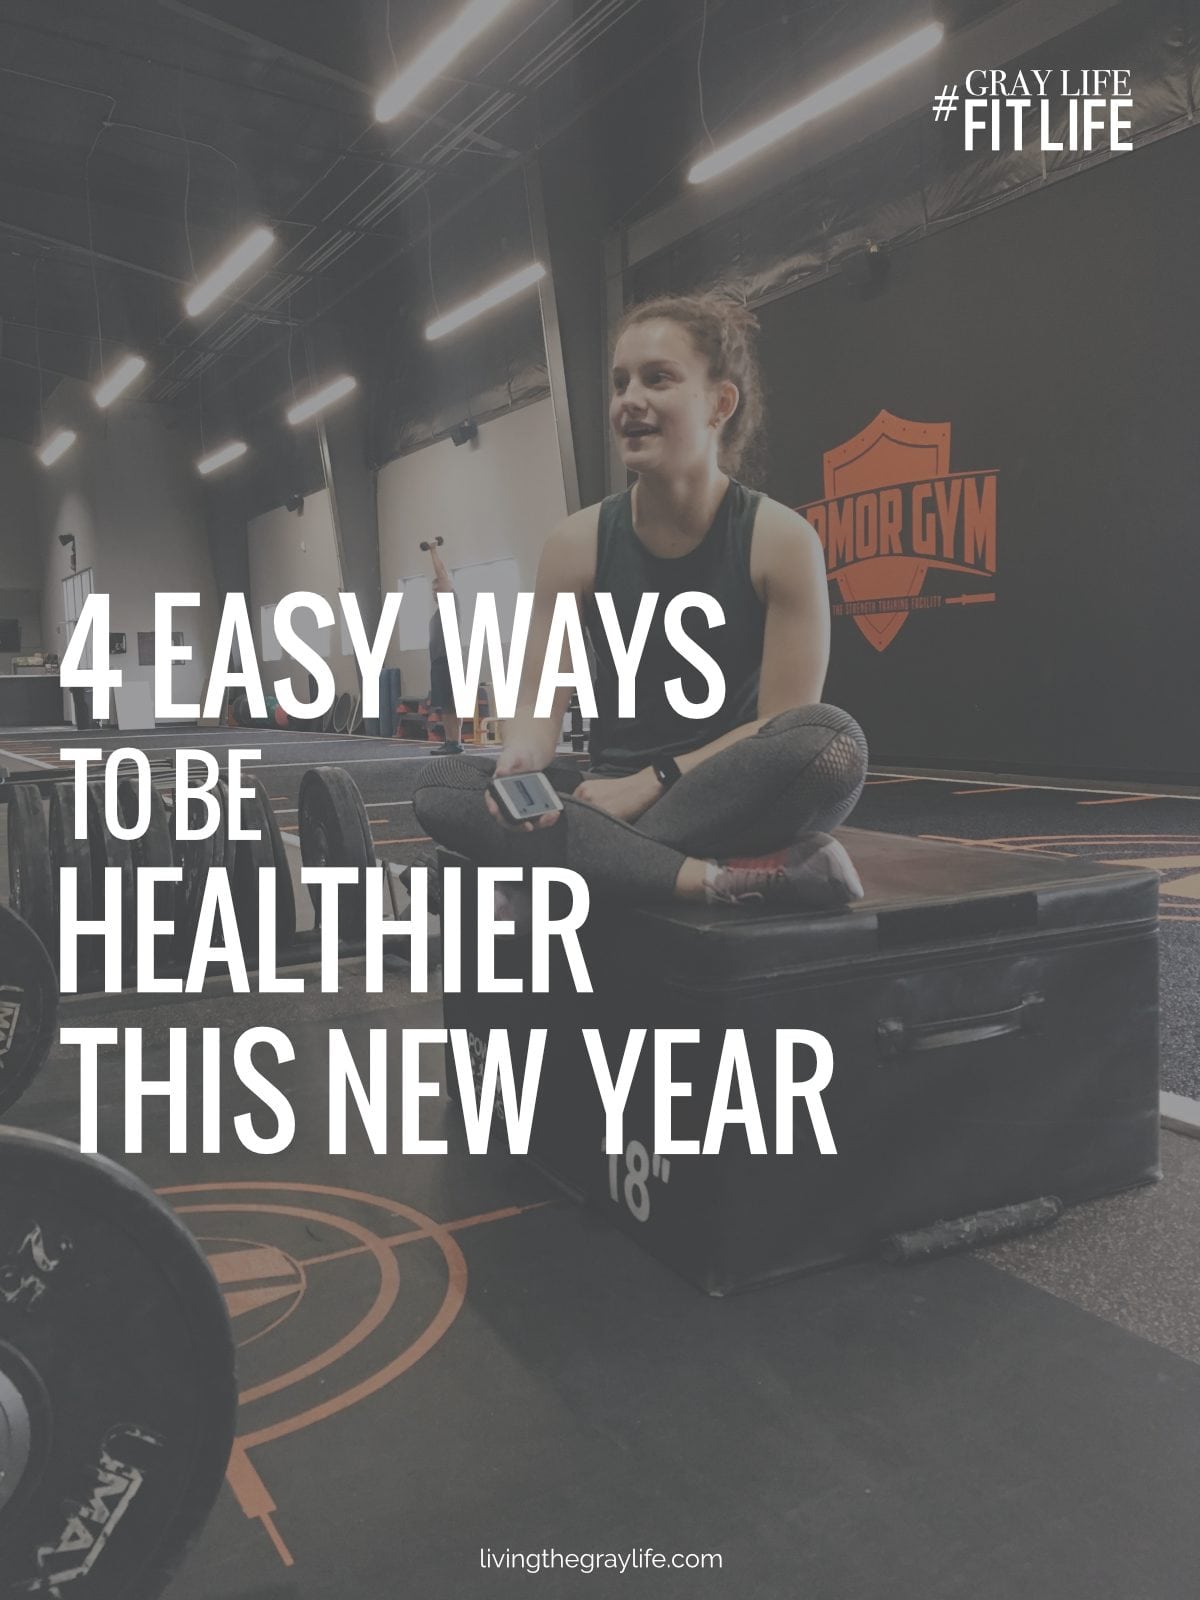 4 Easy Ways to Stay Healthier This New Year | Living the Gray Life - A college fitness and lifestyle blog